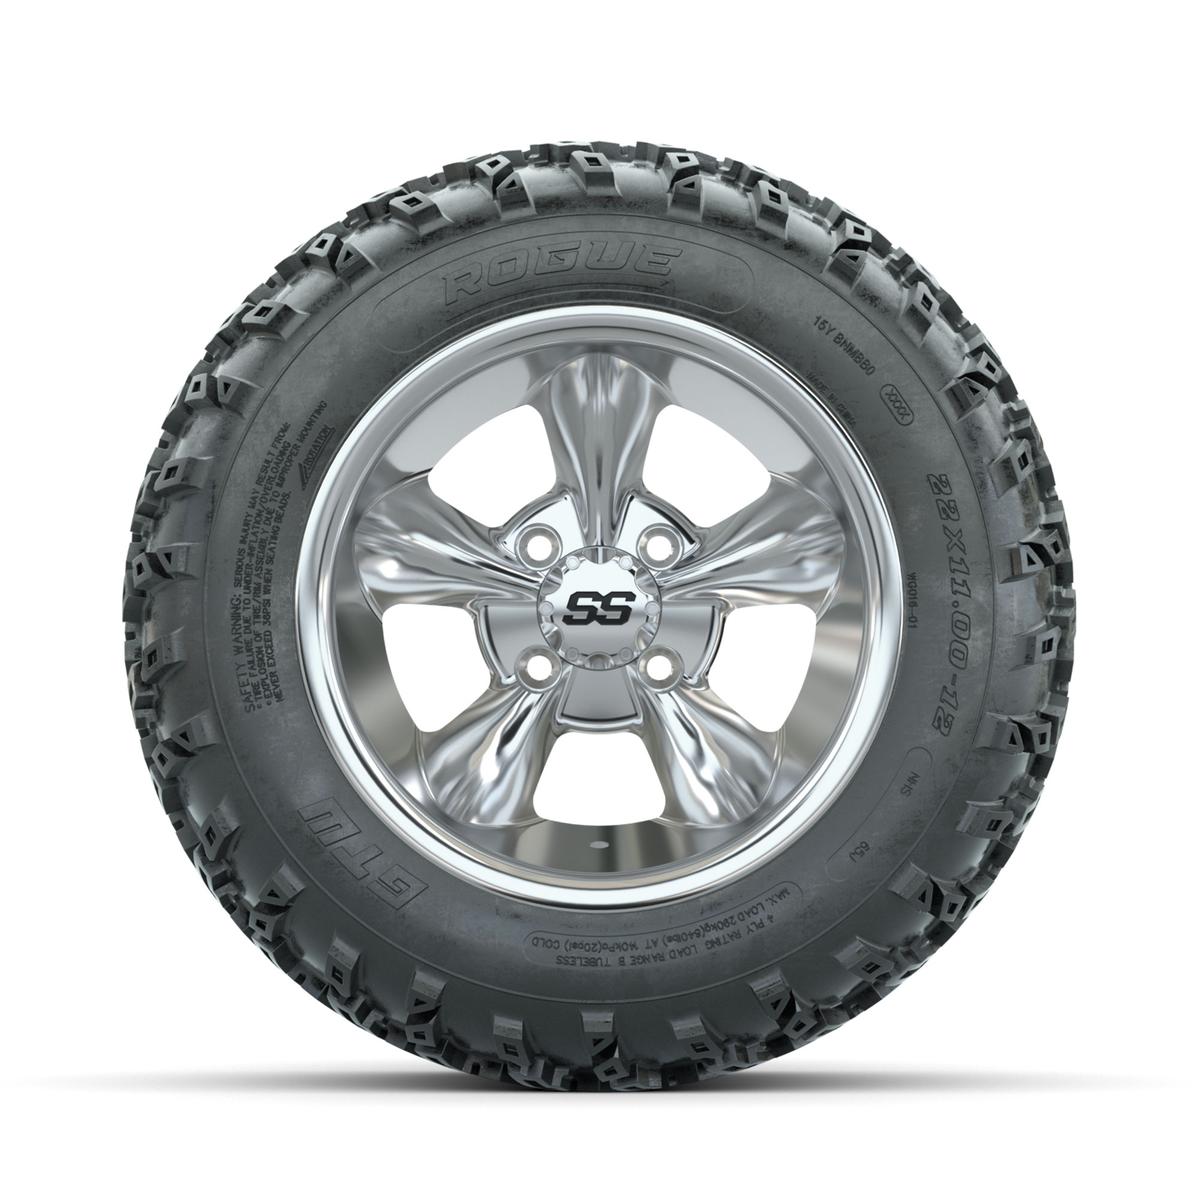 GTW Godfather Chrome 12 in Wheels with 22x11.00-12 Rogue All Terrain Tires – Full Set